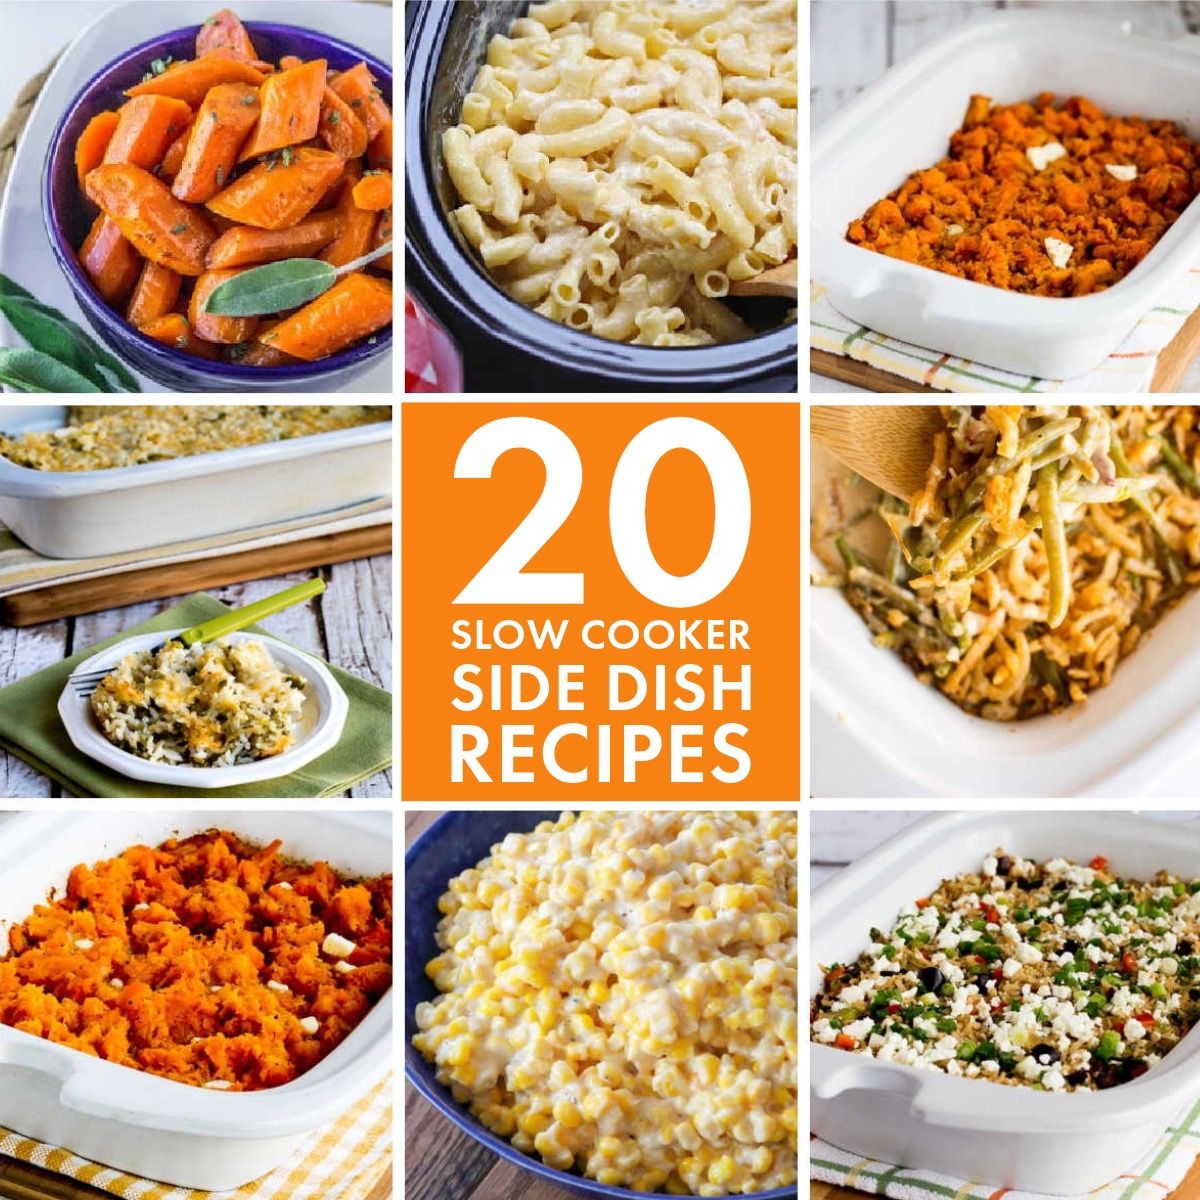 Collage photo for 20 Slow Cooker Side Dish Recipes showing featured recipes.